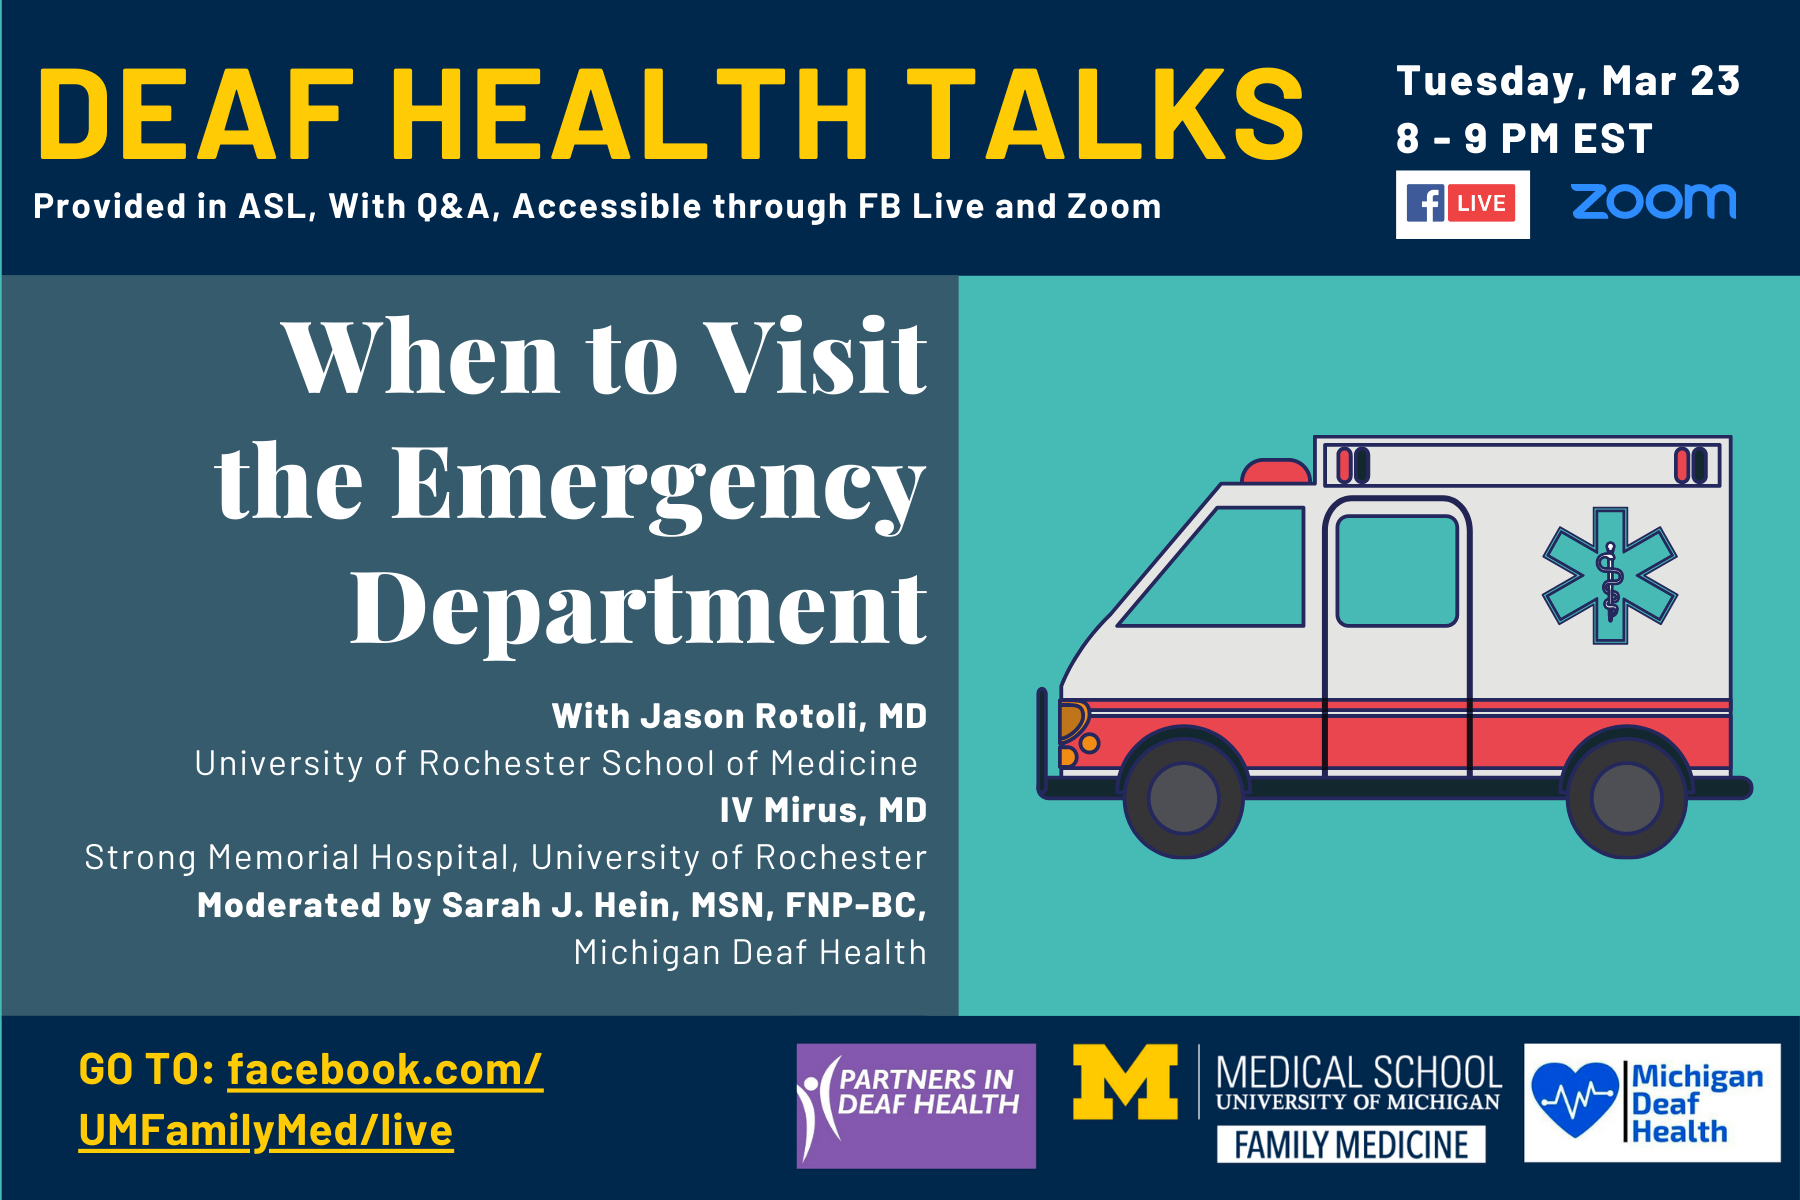 Deaf Health Talks, provided in ASL, with Q&A. Happening Tuesday, March 23, 8 to 9PM EST, on Facebook Live and Zoom. When to Visit the Emergency Department, with Jason Rotoli, MD University of Rochester School of Medicine, IV MIrus, MD Strong Memorial Hosp